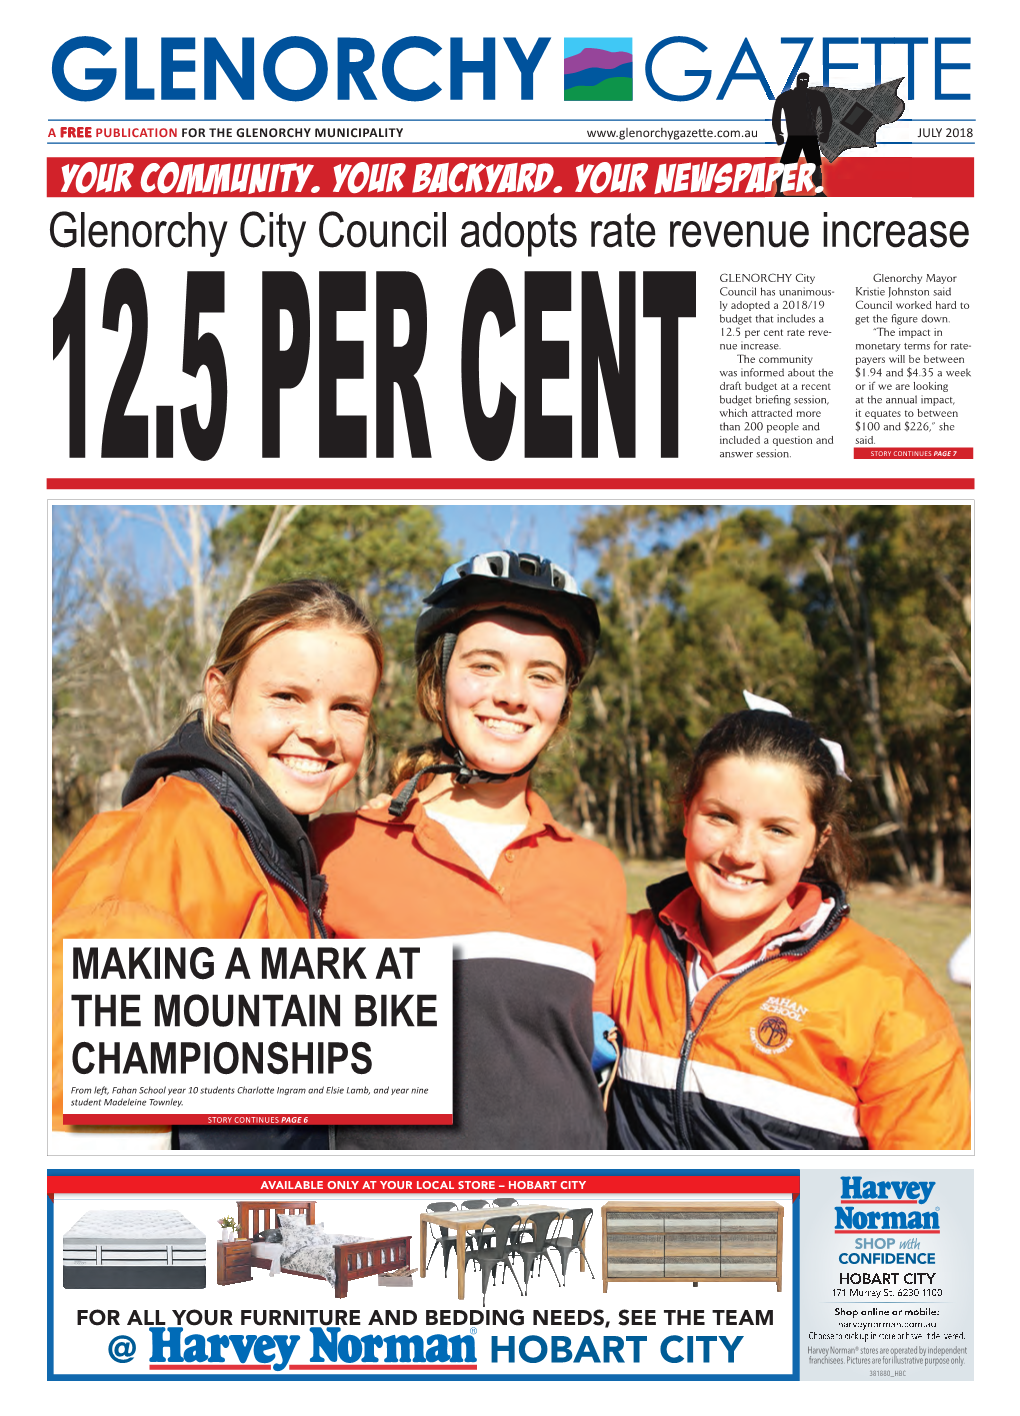 Glenorchy City Council Adopts Rate Revenue Increase